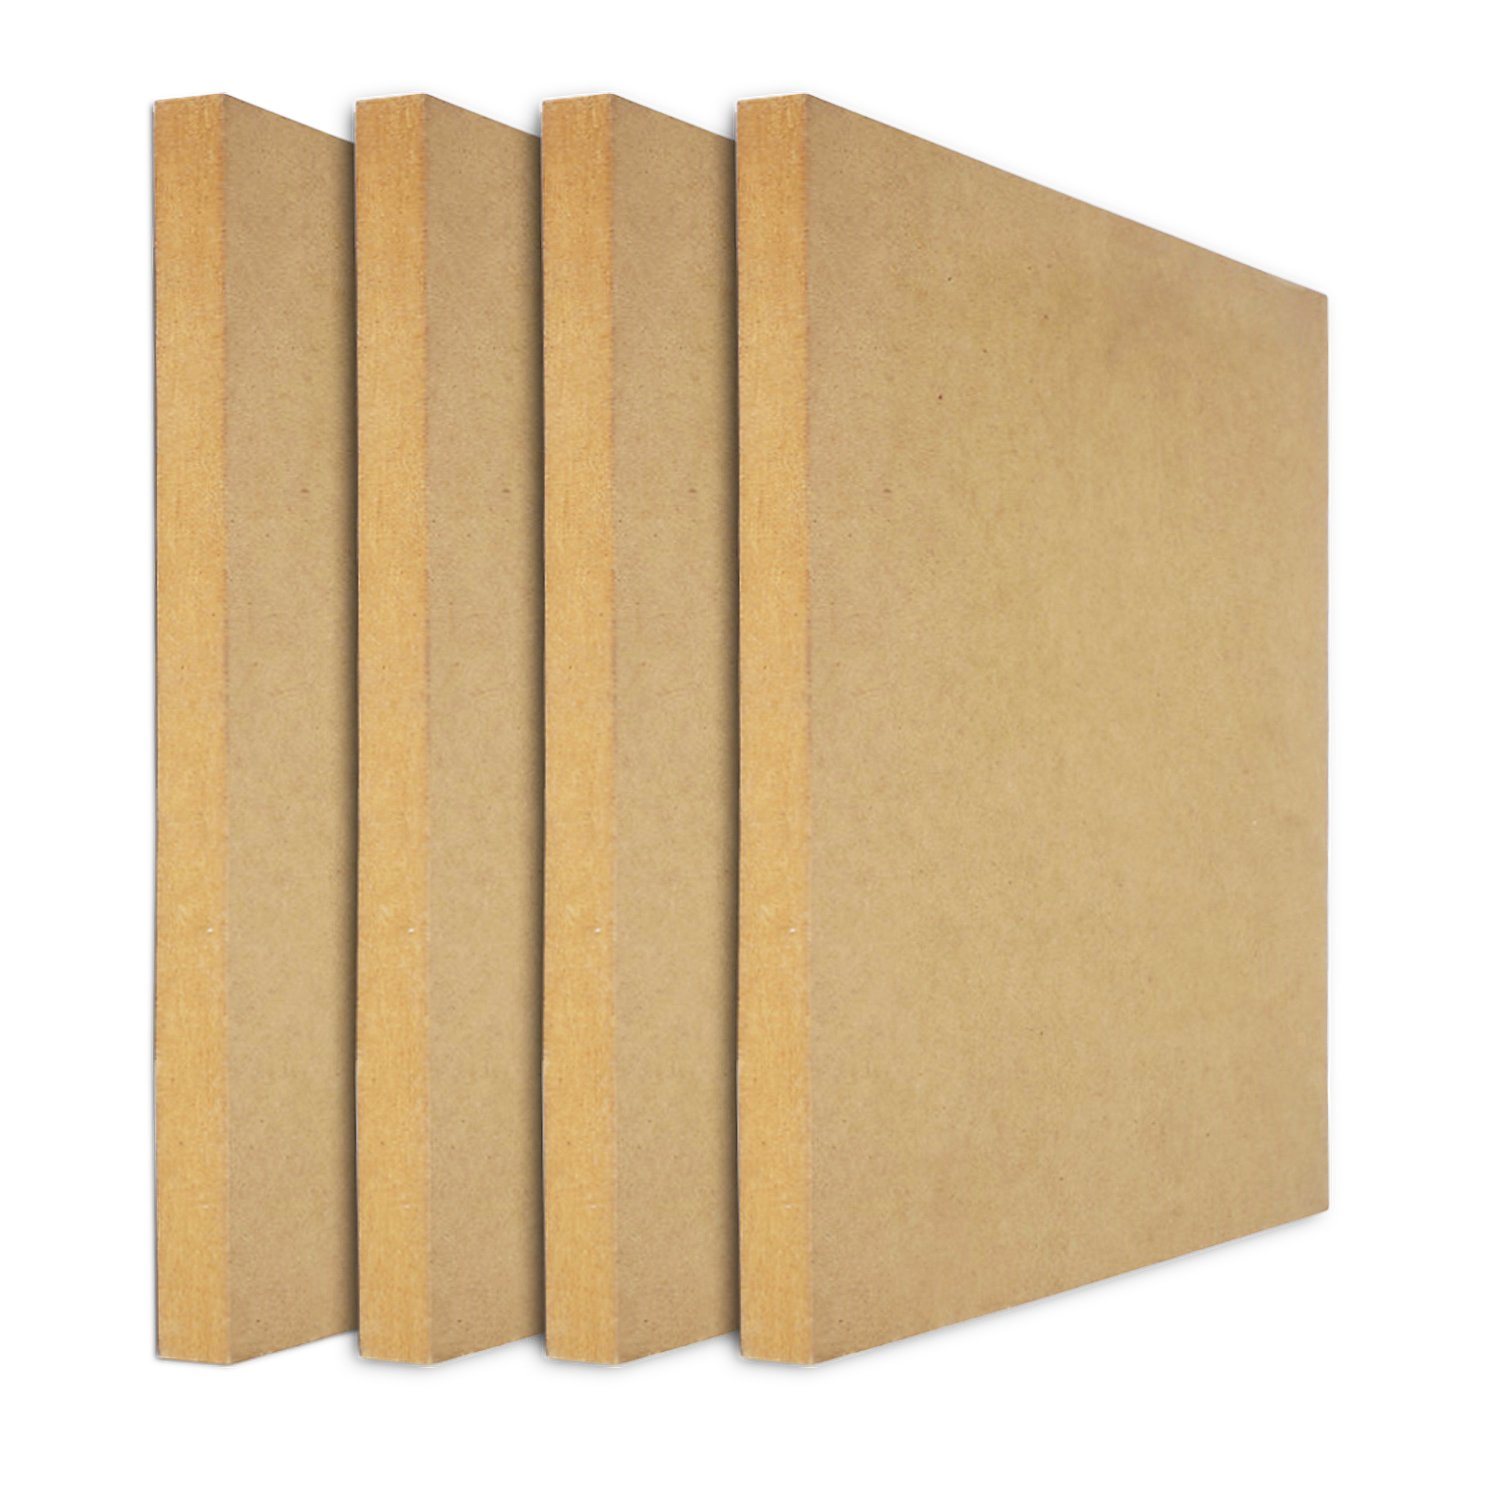 Raw MDF Board for Sale Plain Wood MDF for Furniture